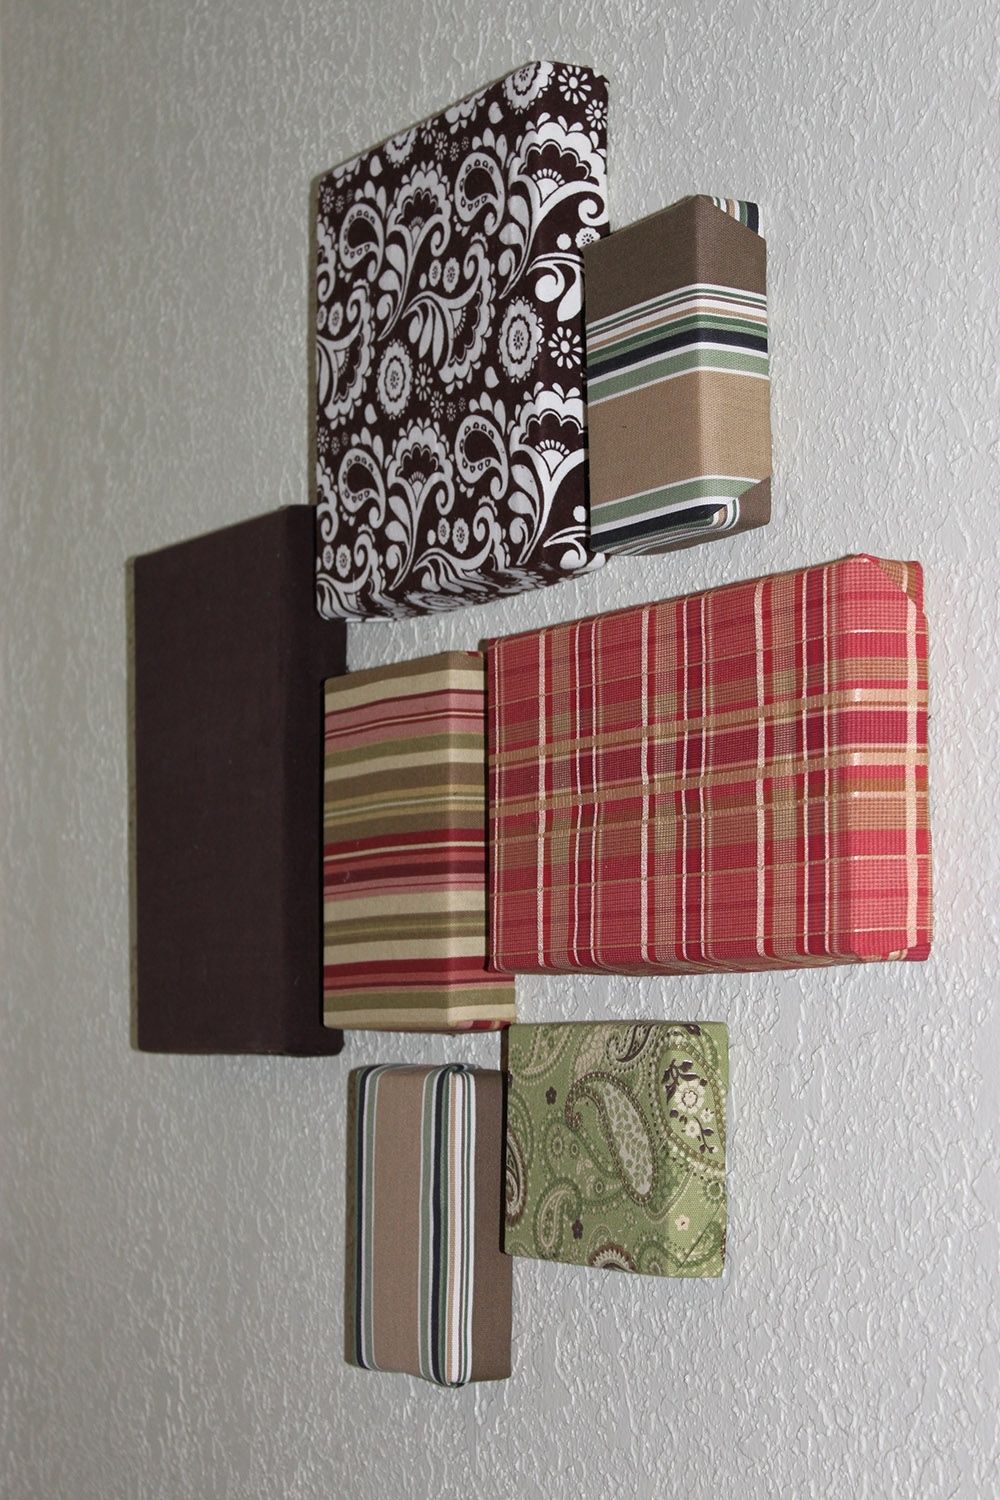 Most Recently Released Easy Wall Art On The Cheap With Fabric Scraps And Repurposed Box For Fabric Scrap Wall Art (View 7 of 15)